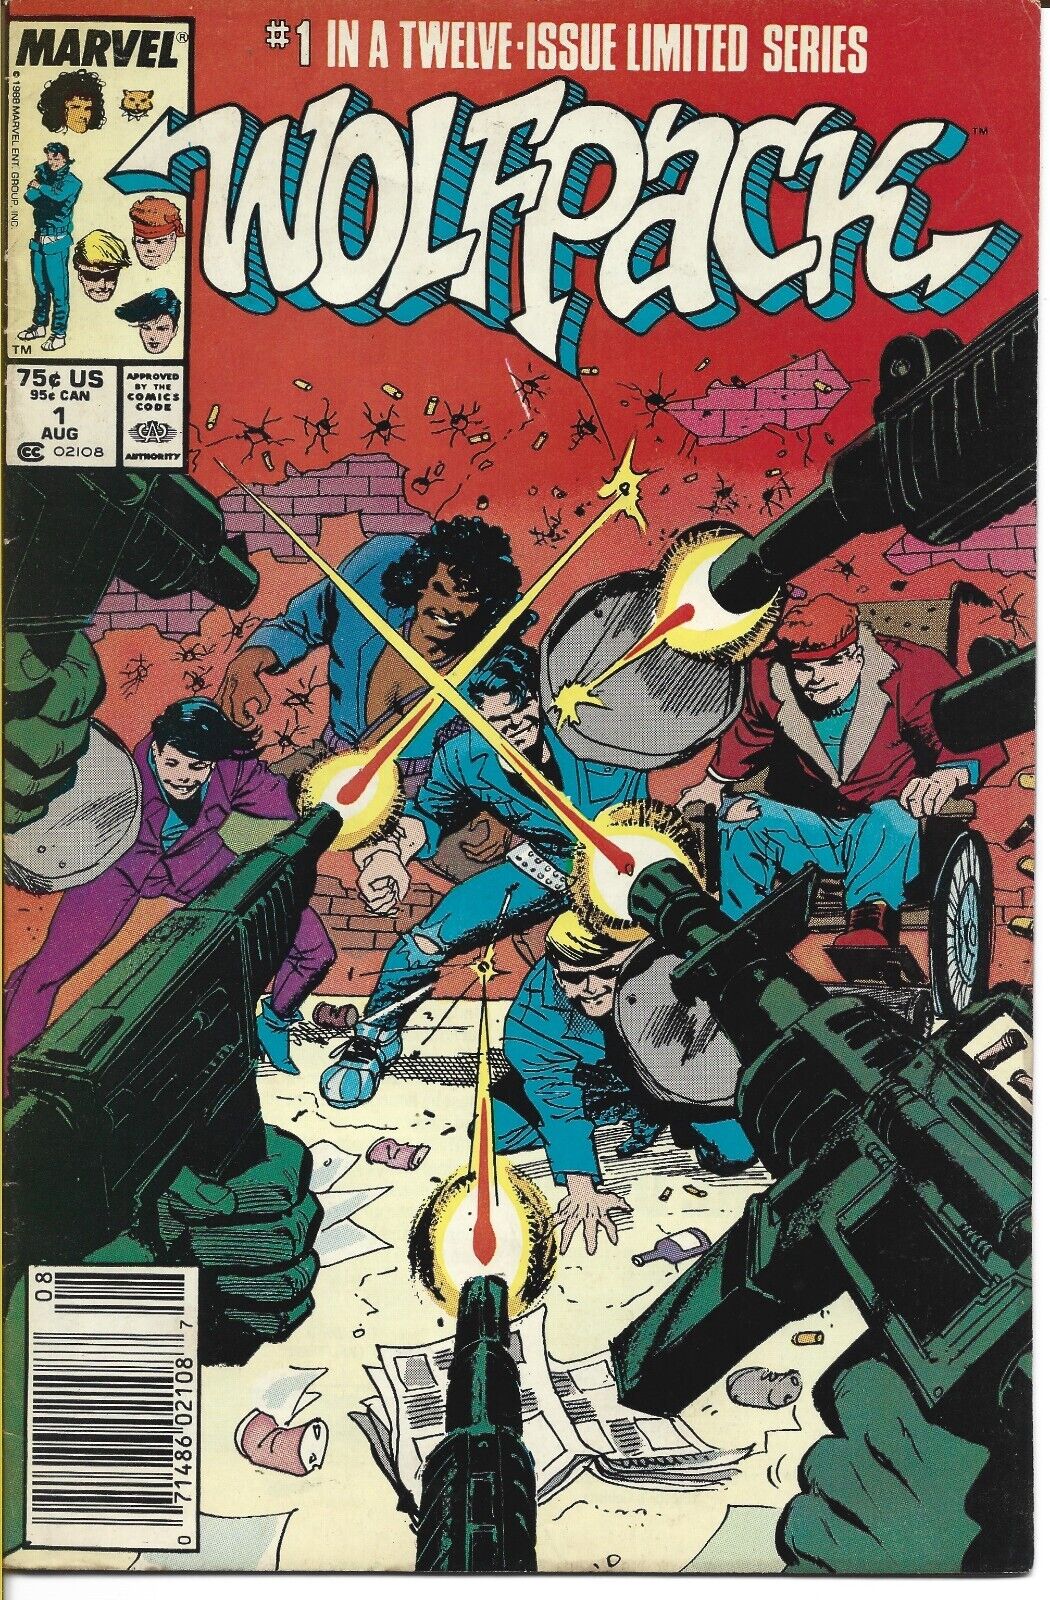 WOLFPACK #1 MARVEL COMICS 1988 BAGGED AND BOARDED